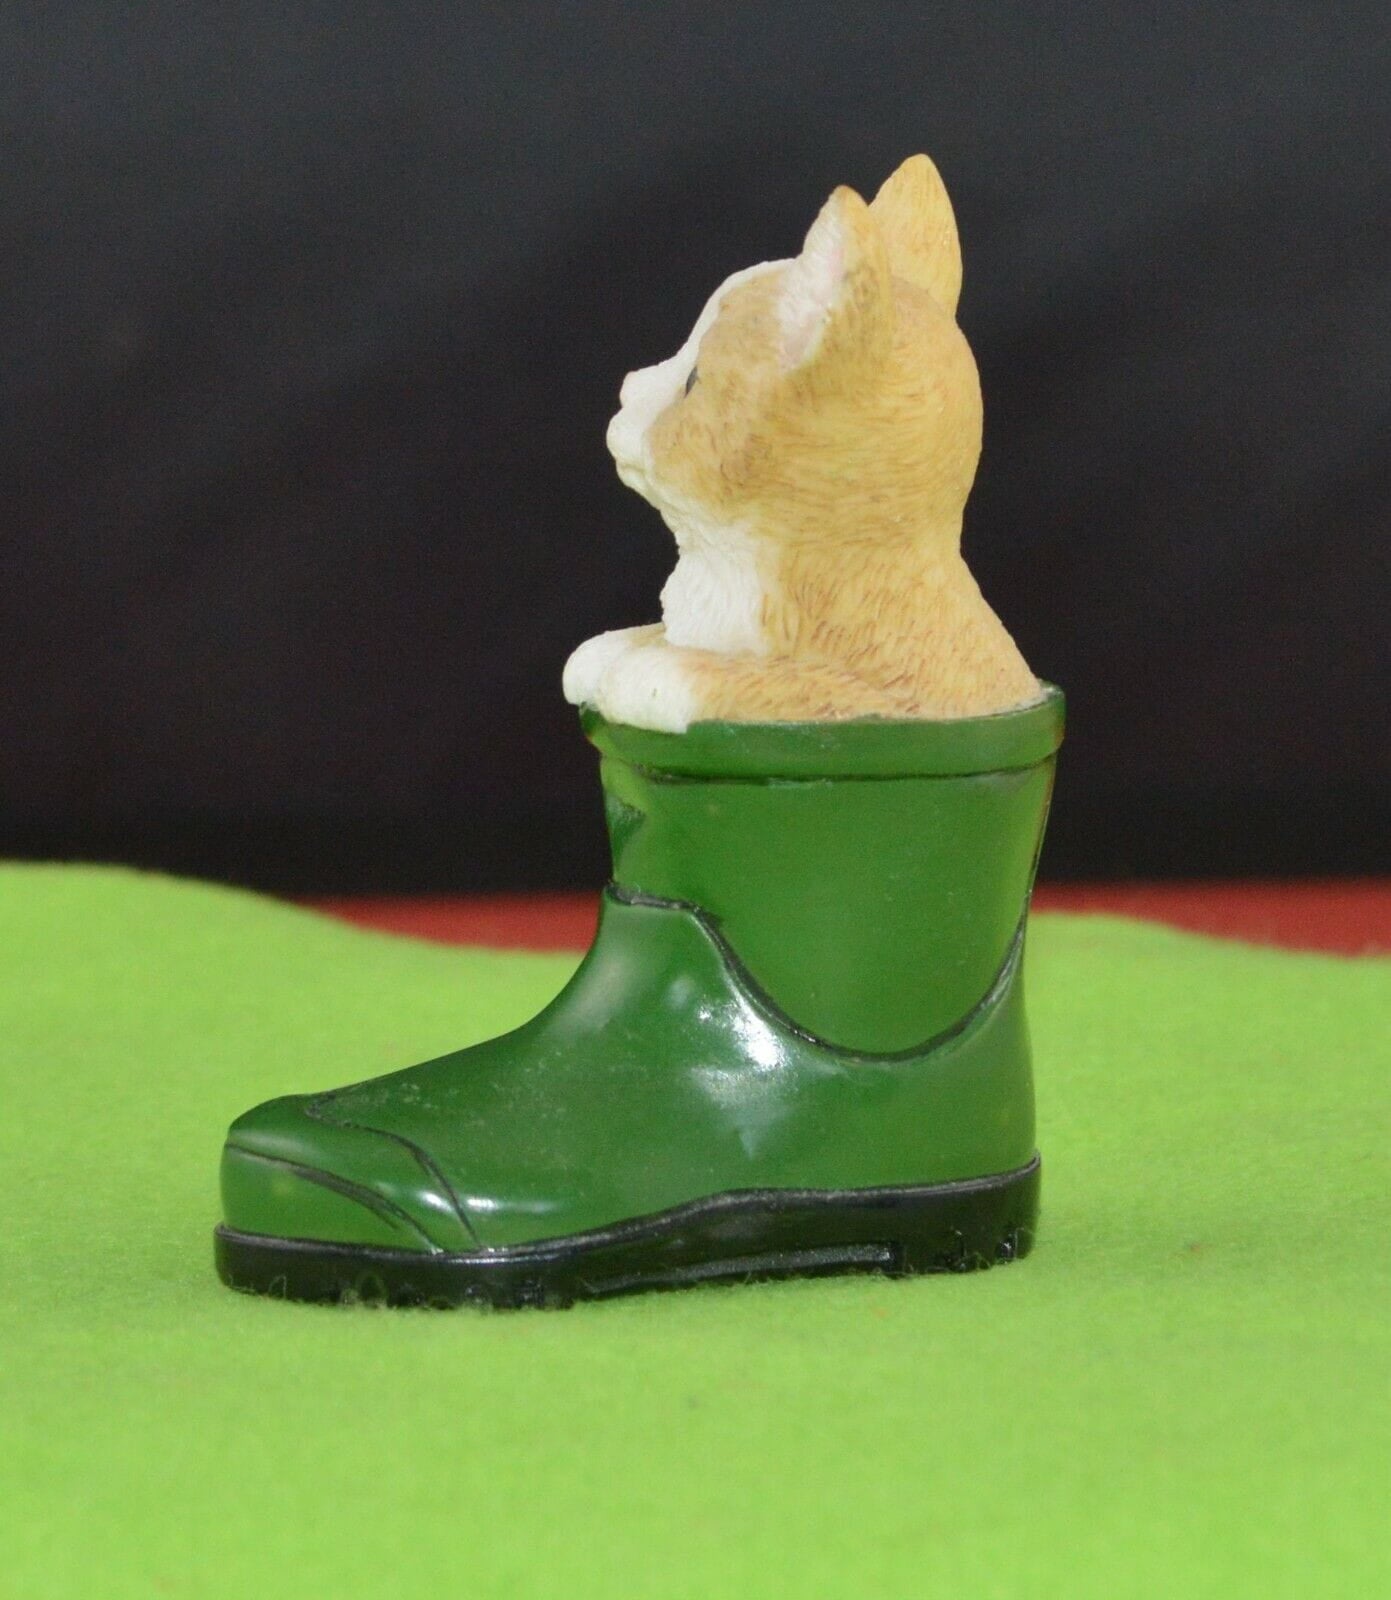 MINIATURE CAT IN A GREEN WELLY & MINIATURE DOG IN A GREEN WELLY - TMD167207